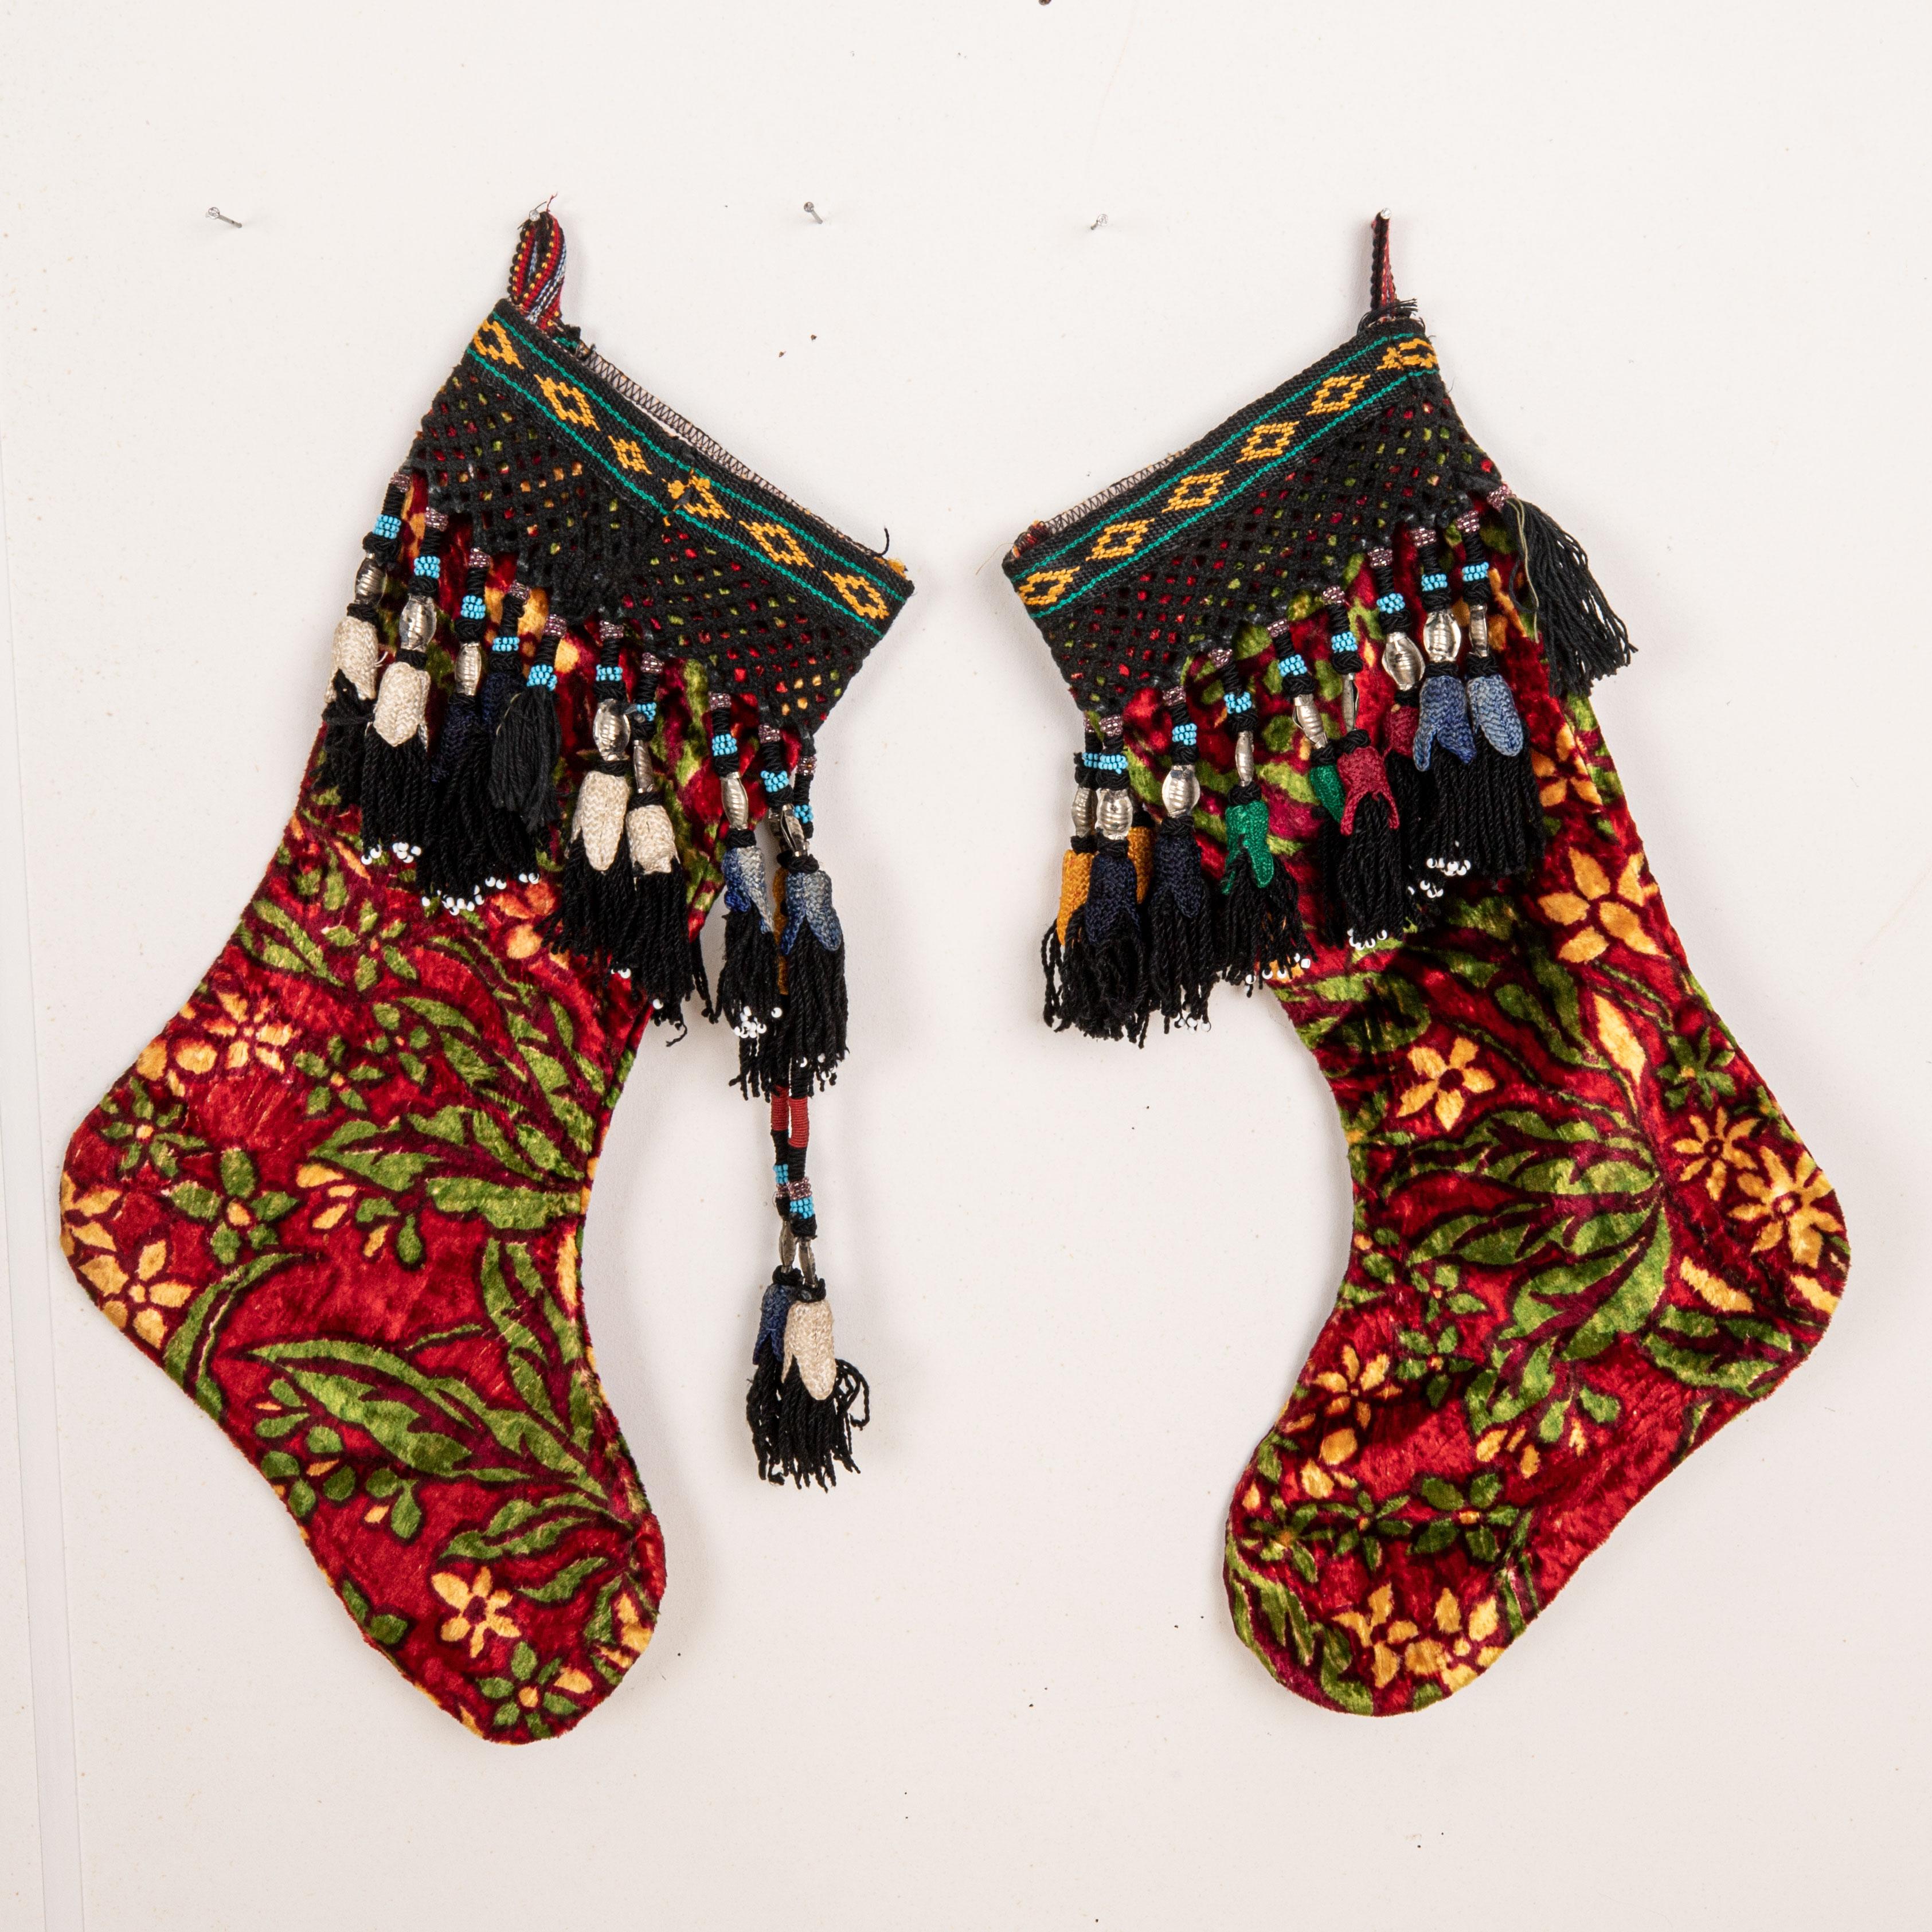 These Christmas Stockings were made from mid 20th C. Uzbek Velvet Fragments.

Please note these were made from vintage Uzbek Velvet fragments.
